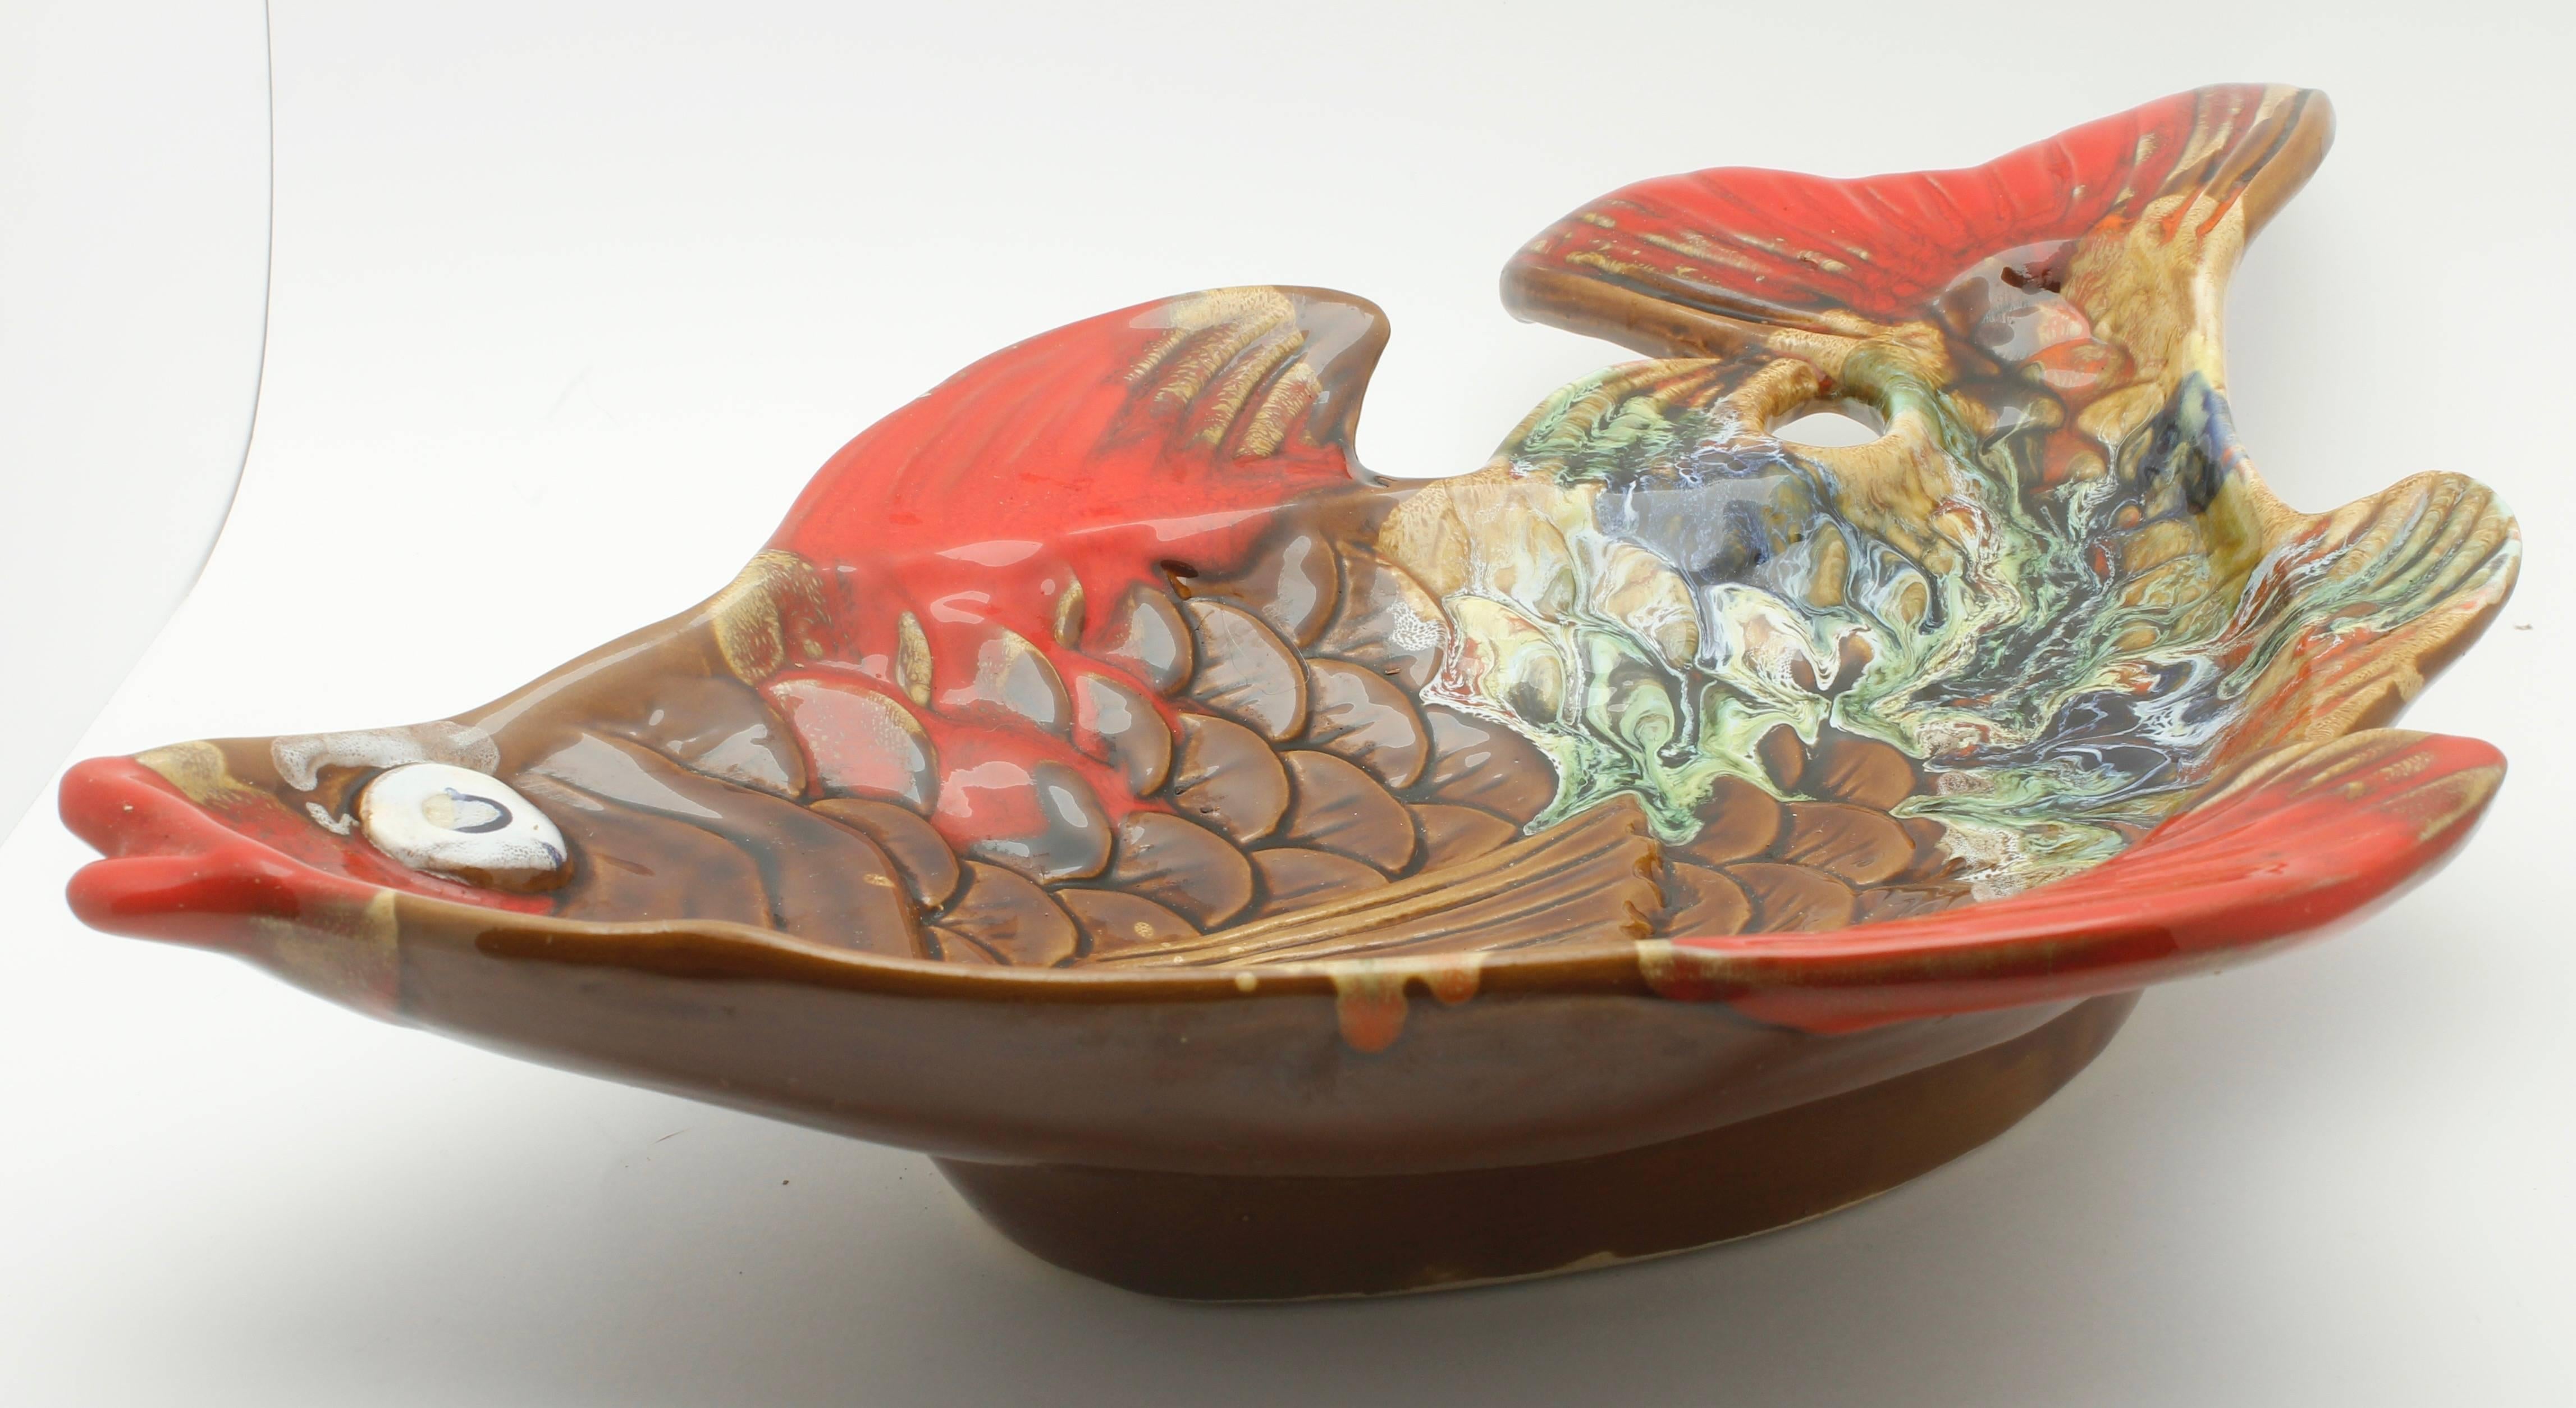 Vallauris (France) pottery ceramic, red and brown and green in color fish shape plate.

The piece is in excellent condition and a real beauty!


